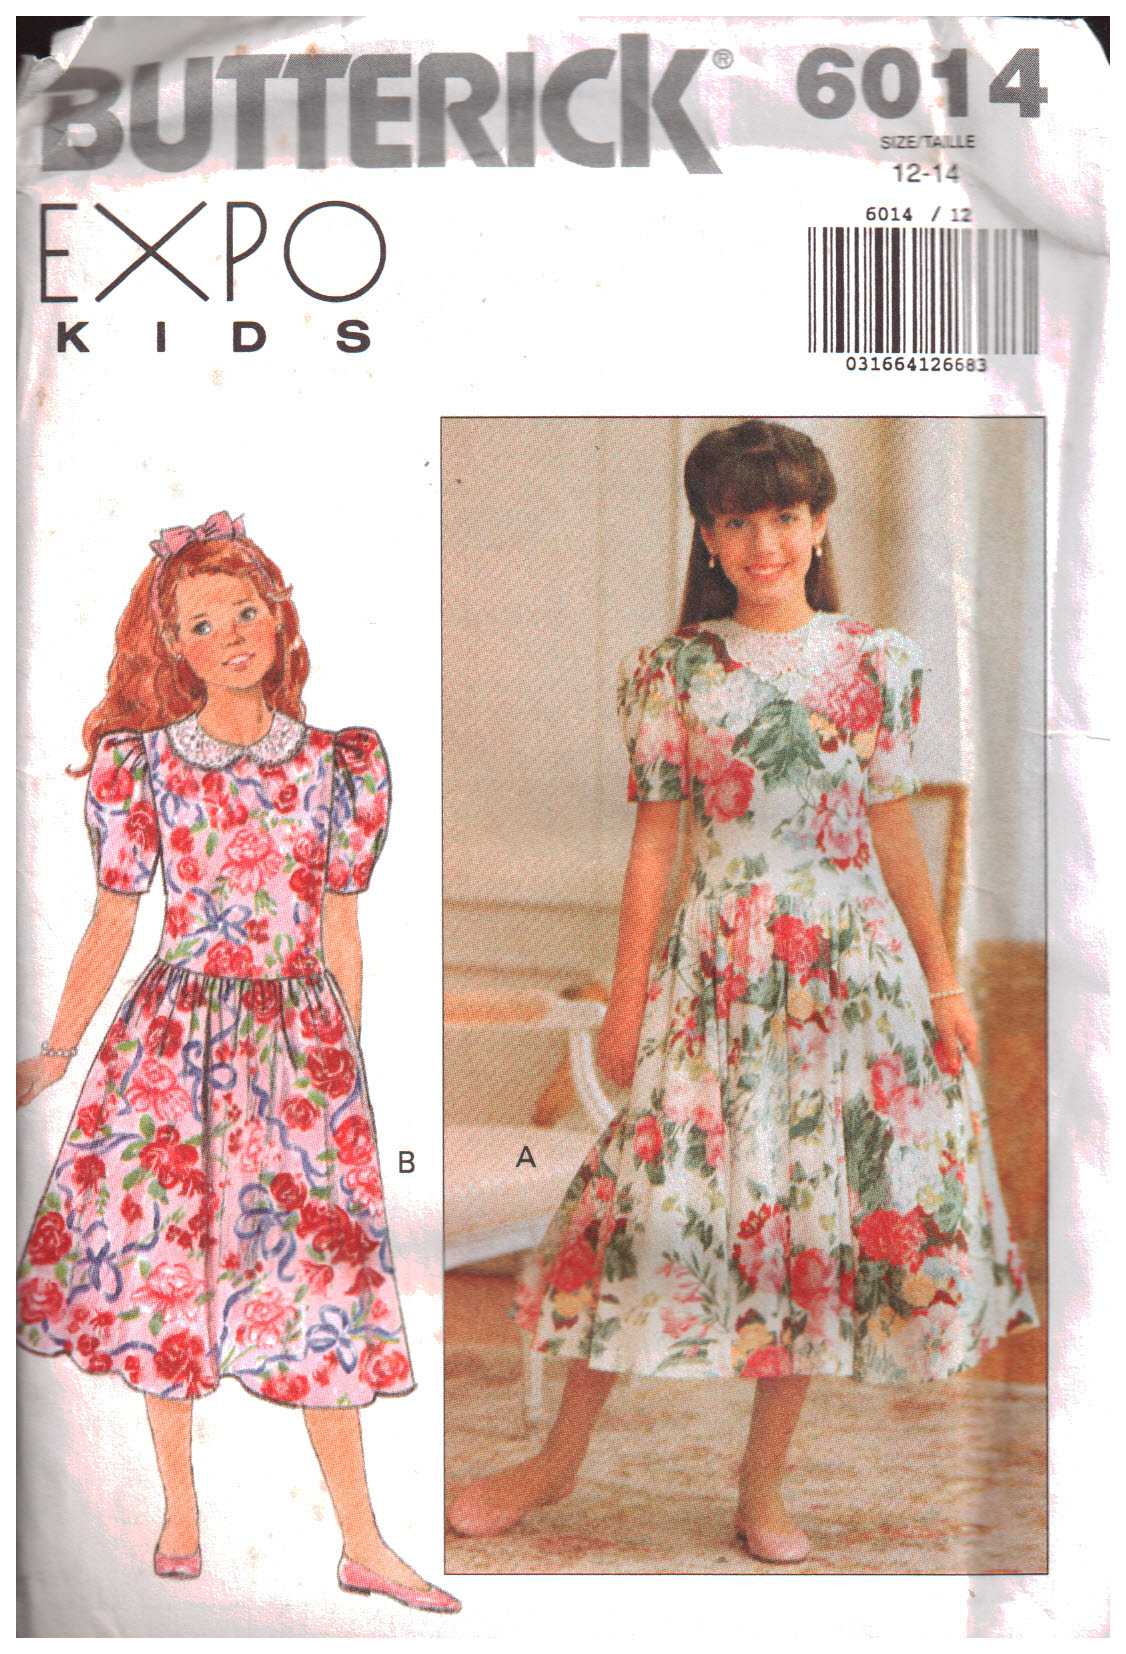 Buy DRESS SEWING PATTERN Make Girls Clothes Kids Party Church Flower Girl  Easter Child Size 3 4 5 6 7 8 10 12 14 for Children 1184 Online in India -  Etsy